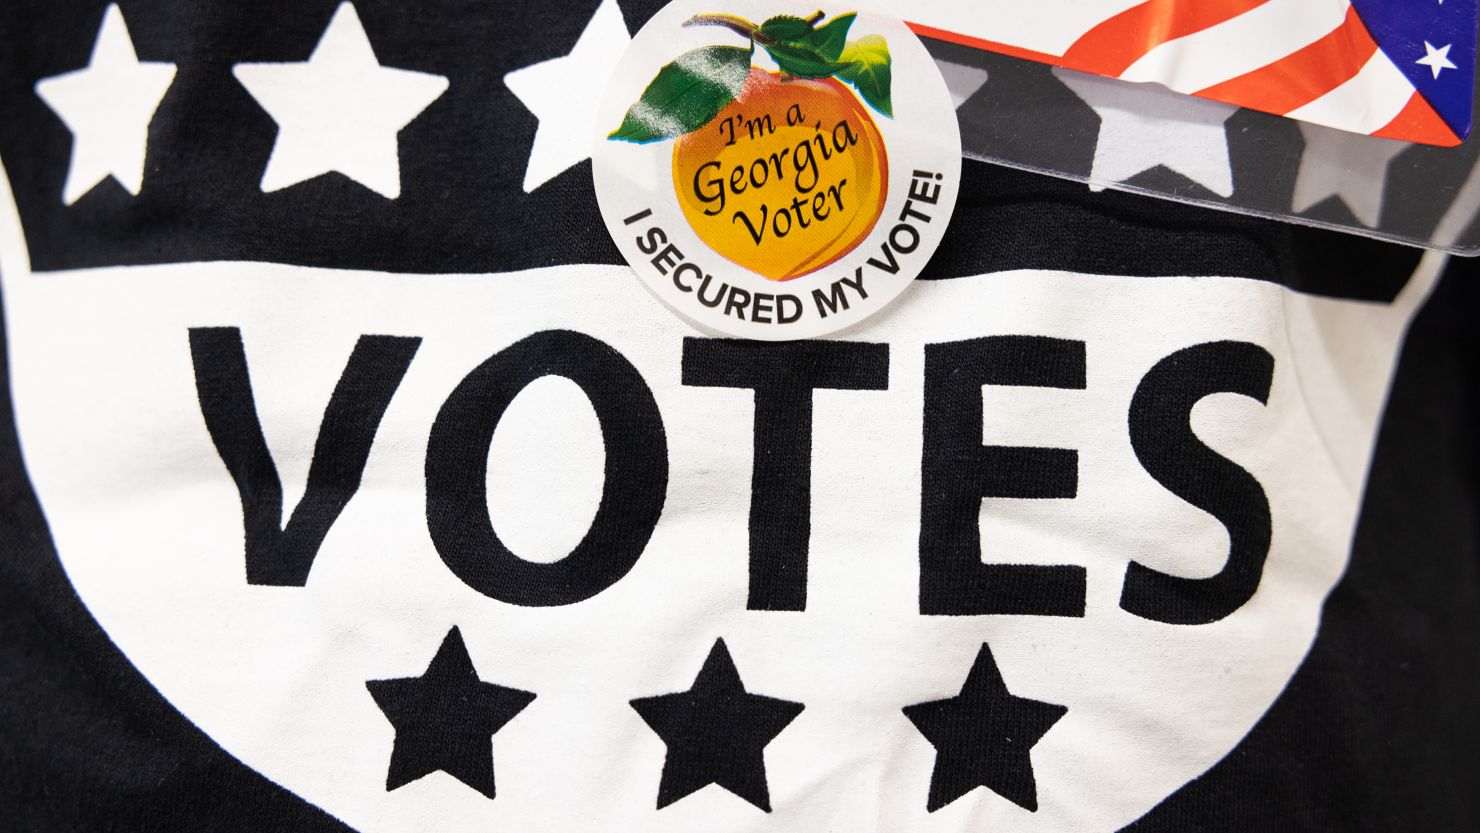 A poll worker wears an "I'm a Georgia Voter" sticker at the Metropolitan Library polling location on May 24, 2022 in Atlanta, Georgia. 